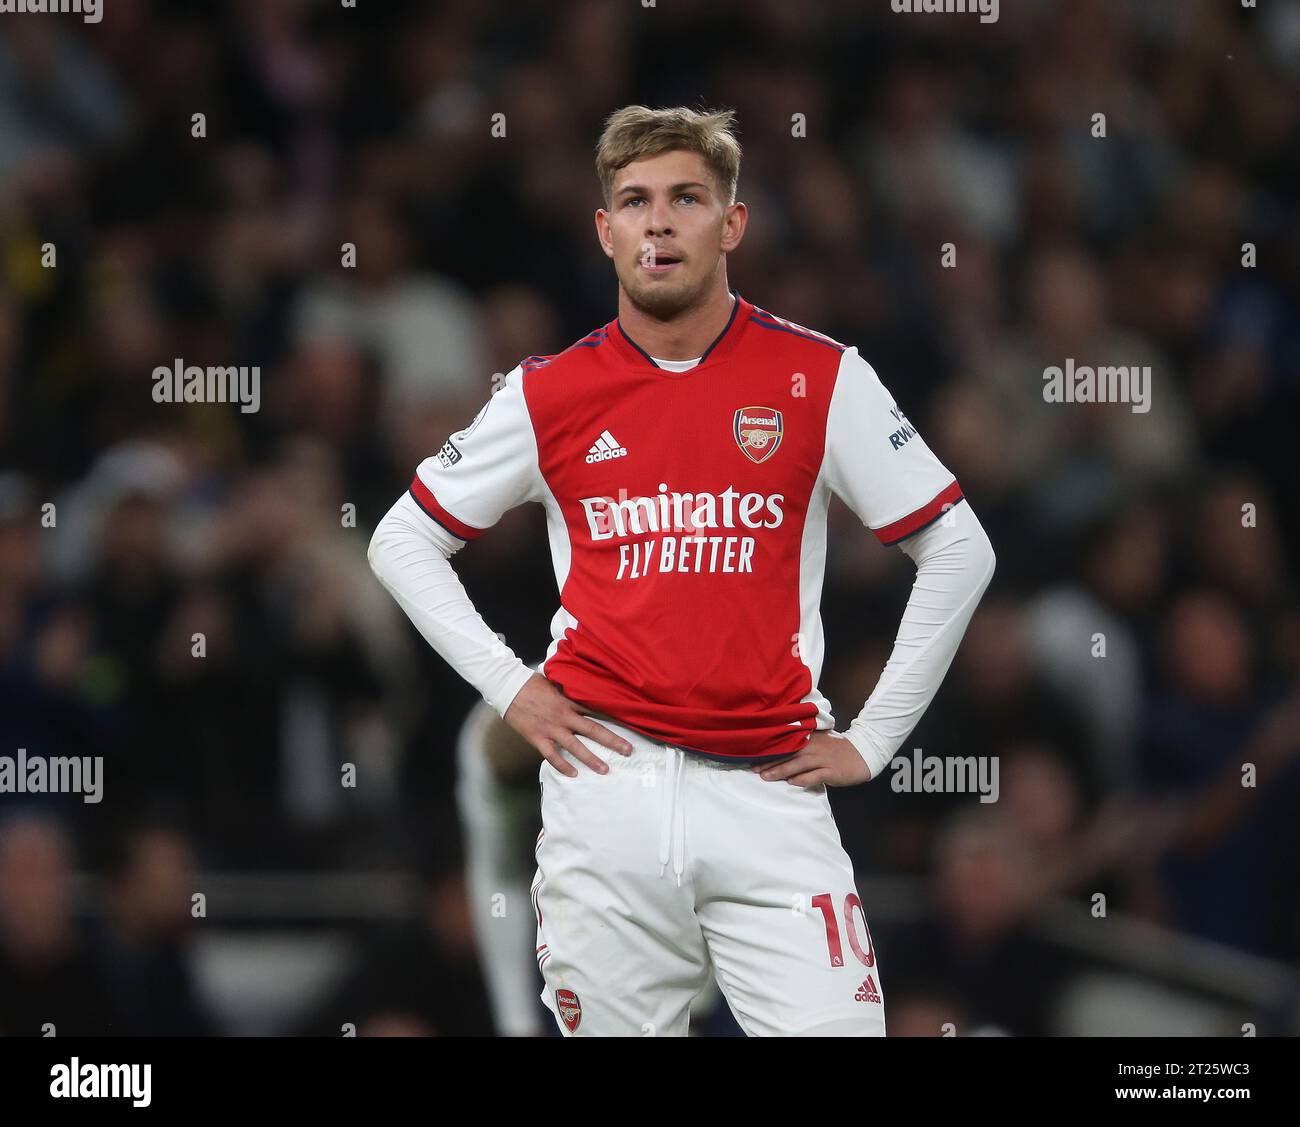 Emile Smith Rowe of Arsenal looks disappointed & dejected after the 3-0 loss against rivals Tottenham Hotspur. - Tottenham Hotspur v Arsenal, Premier League, Tottenham Hotspur Stadium, London, UK - 12th May 2022 Editorial Use Only - DataCo restrictions apply Stock Photo